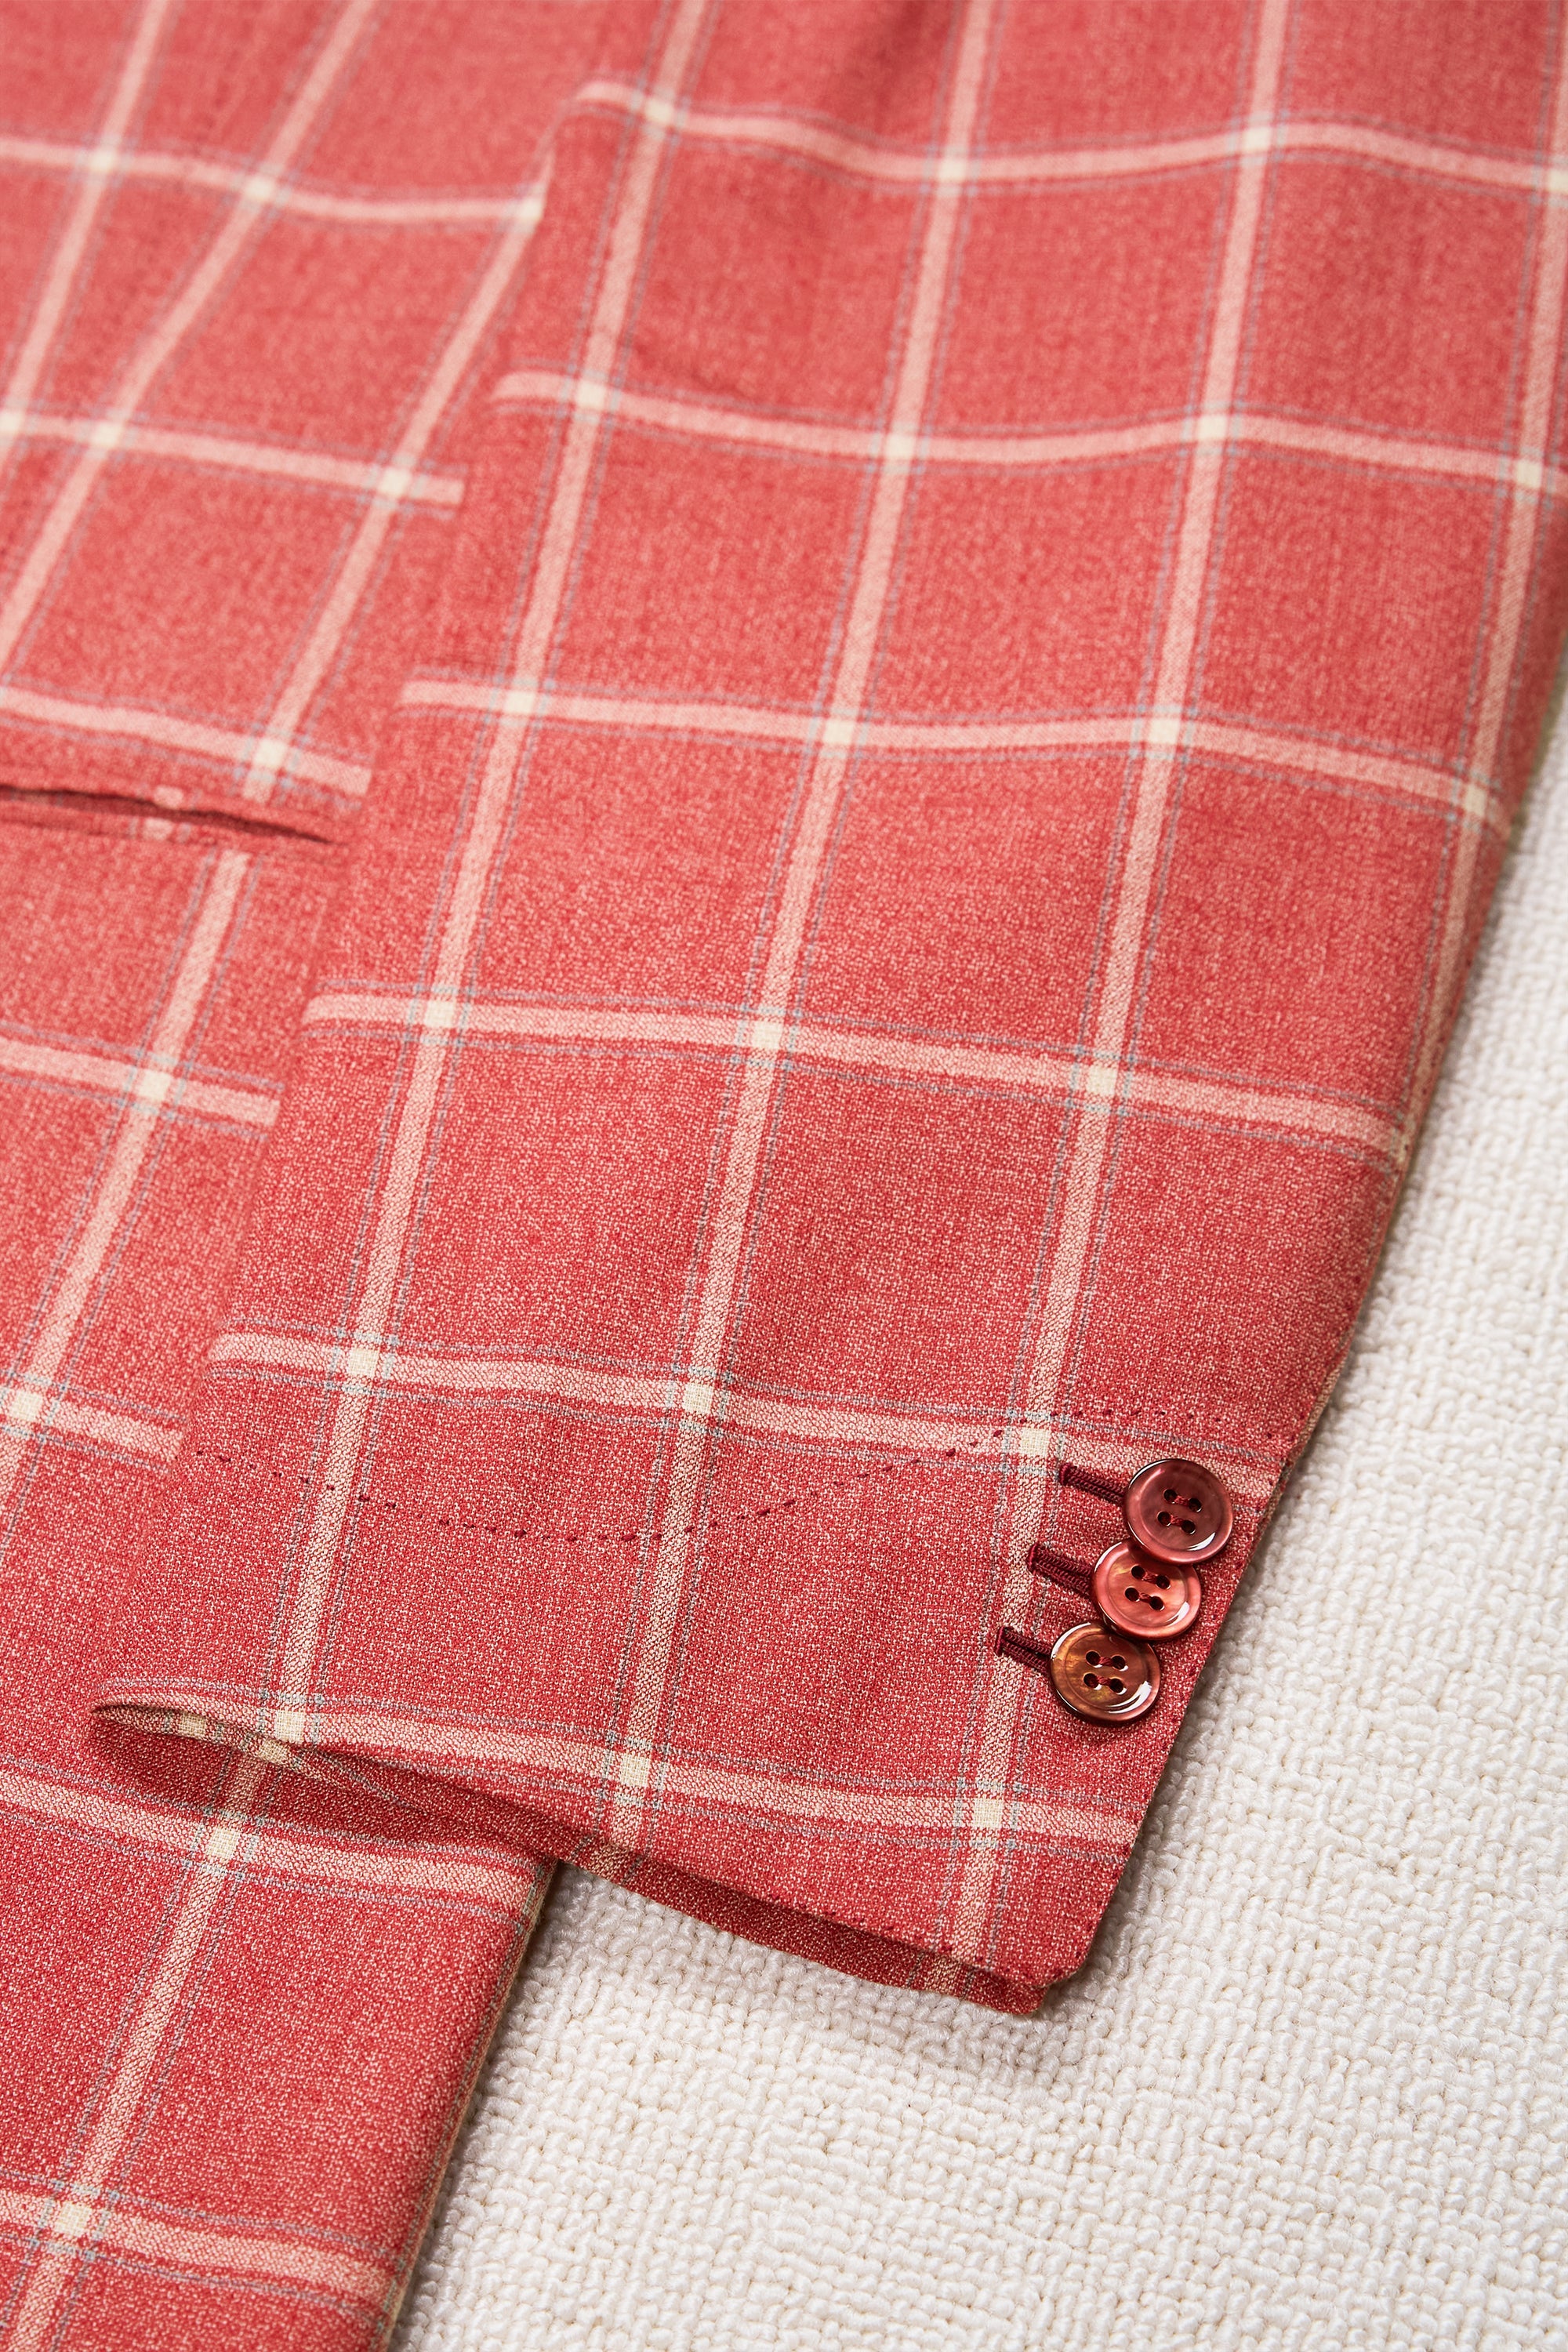 Anglofilo Pink with Beige/Blue Check Wool Sport Coat Bespoke